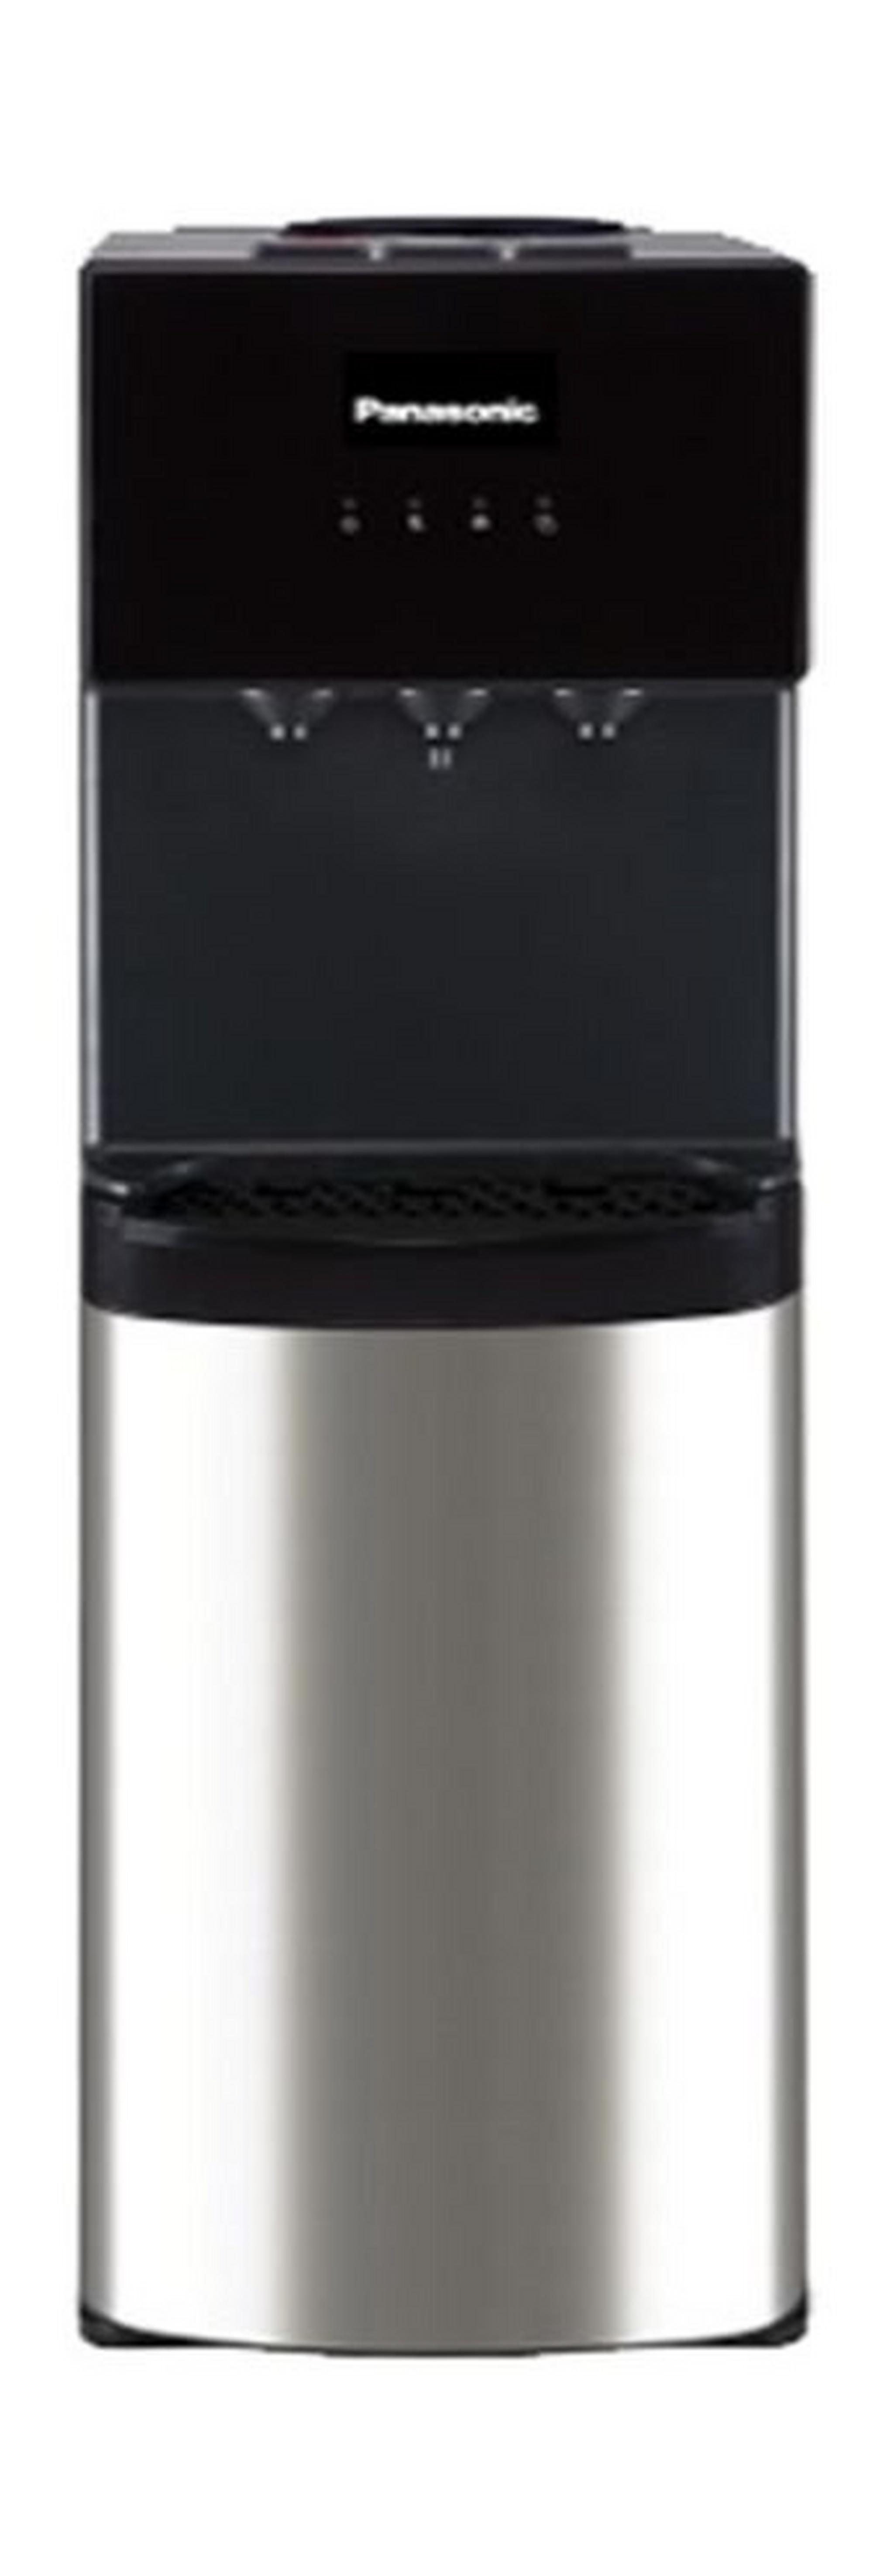 Panasonic Hot And Cold Water Dispenser - SDM-WD3238TG